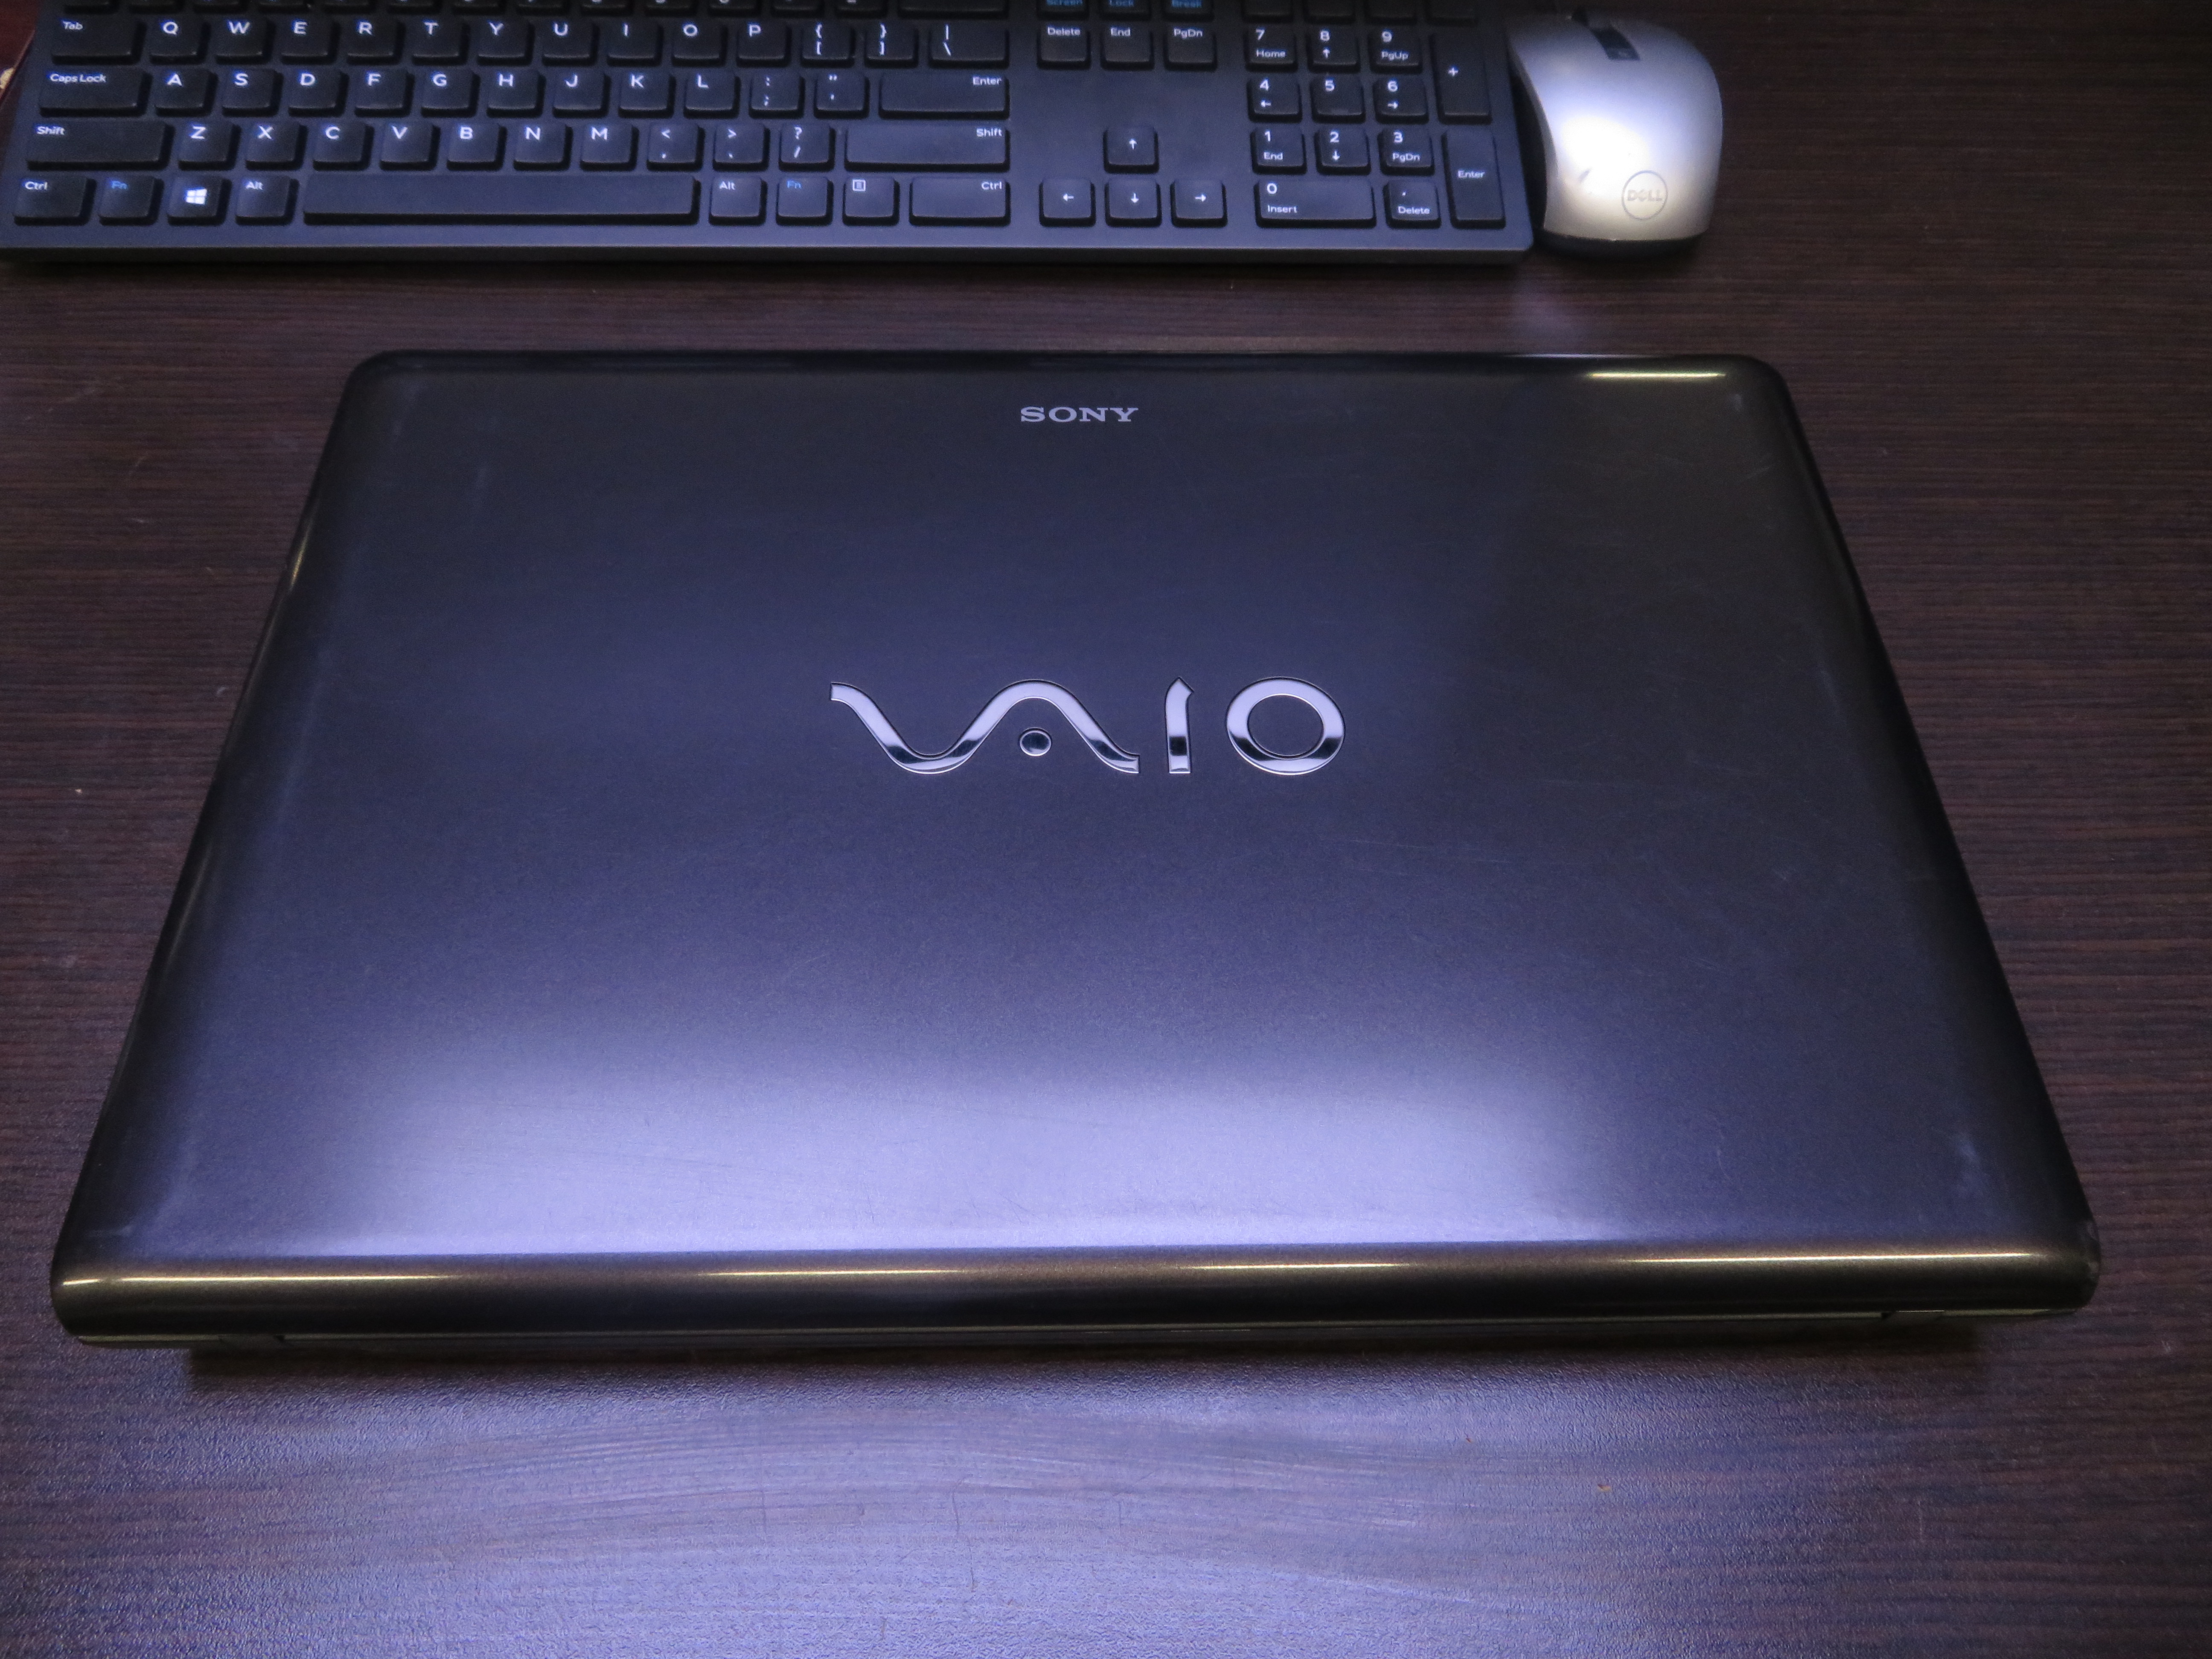 are the drivers on the sony vaio recovery disk